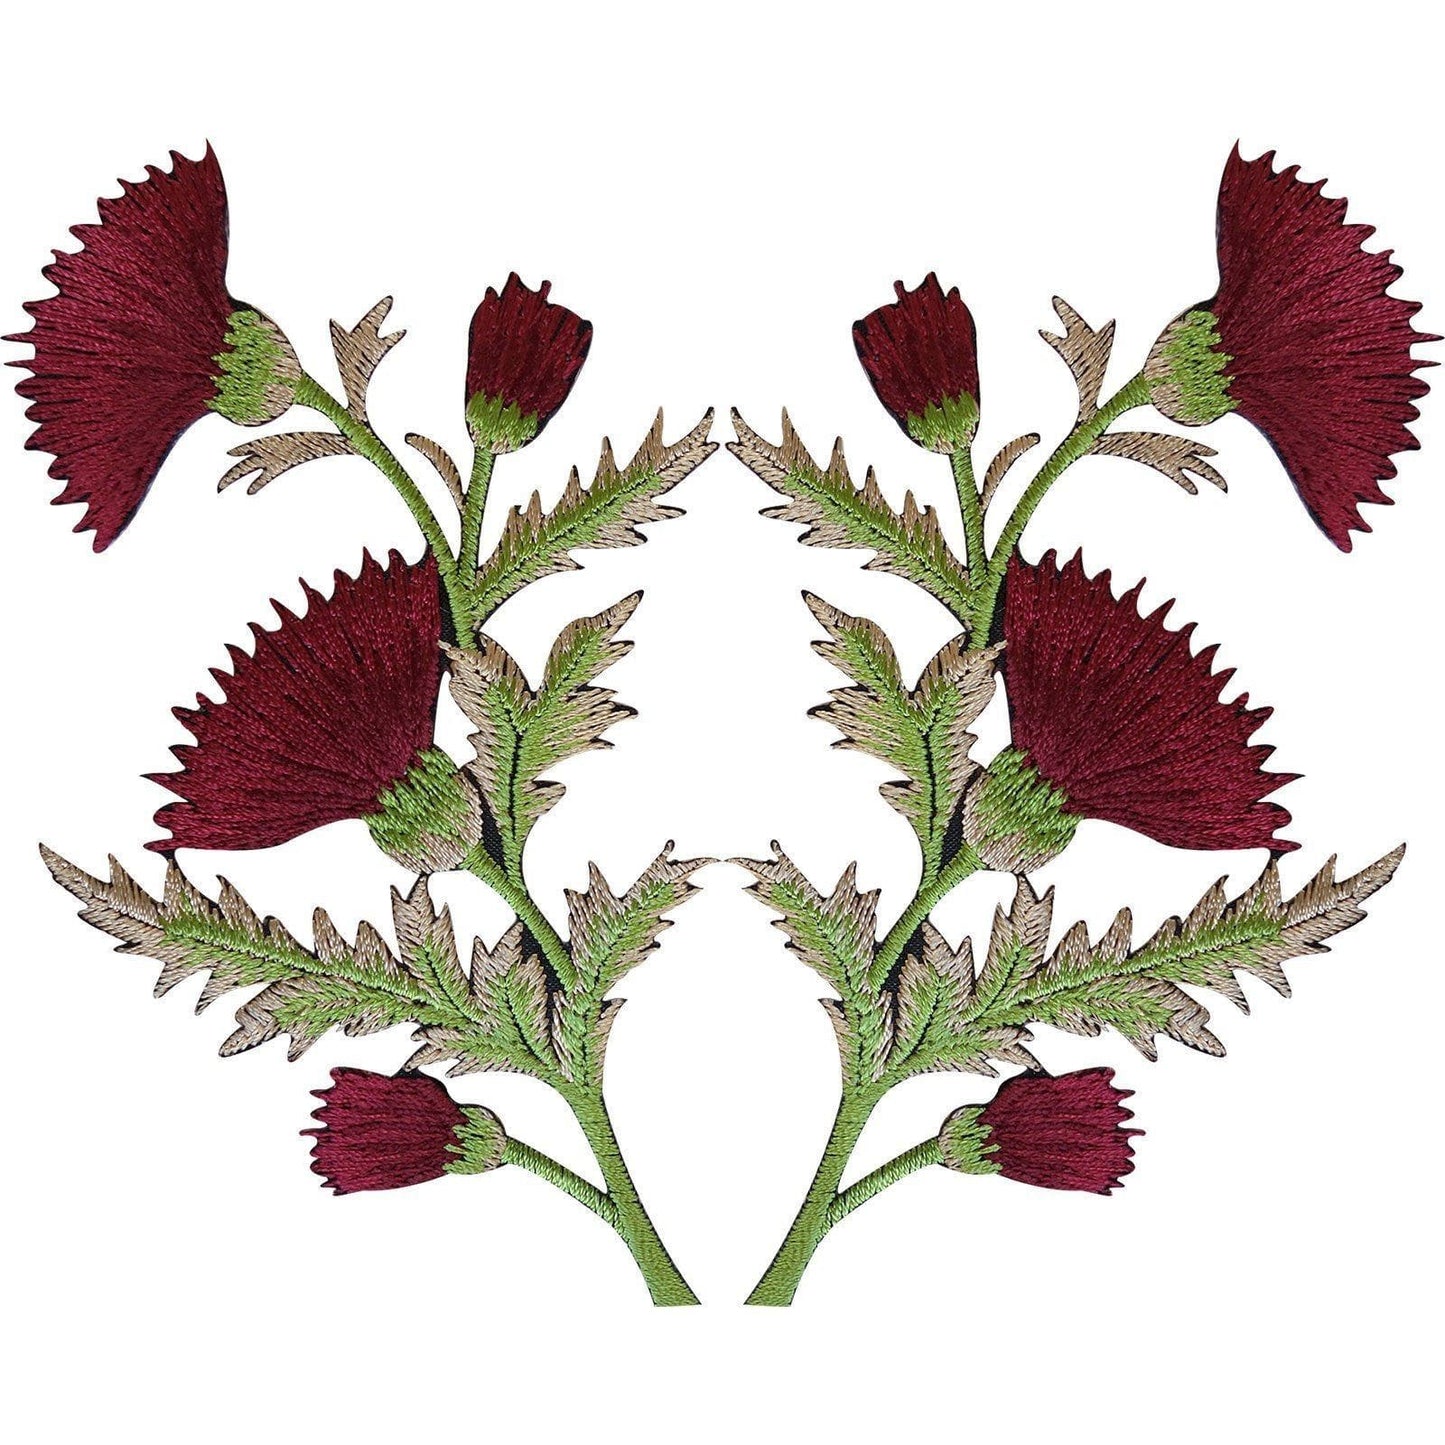 Pair of Burgundy Maroon Red Thistle Flower Patches Iron On Sew On Flowers Patch